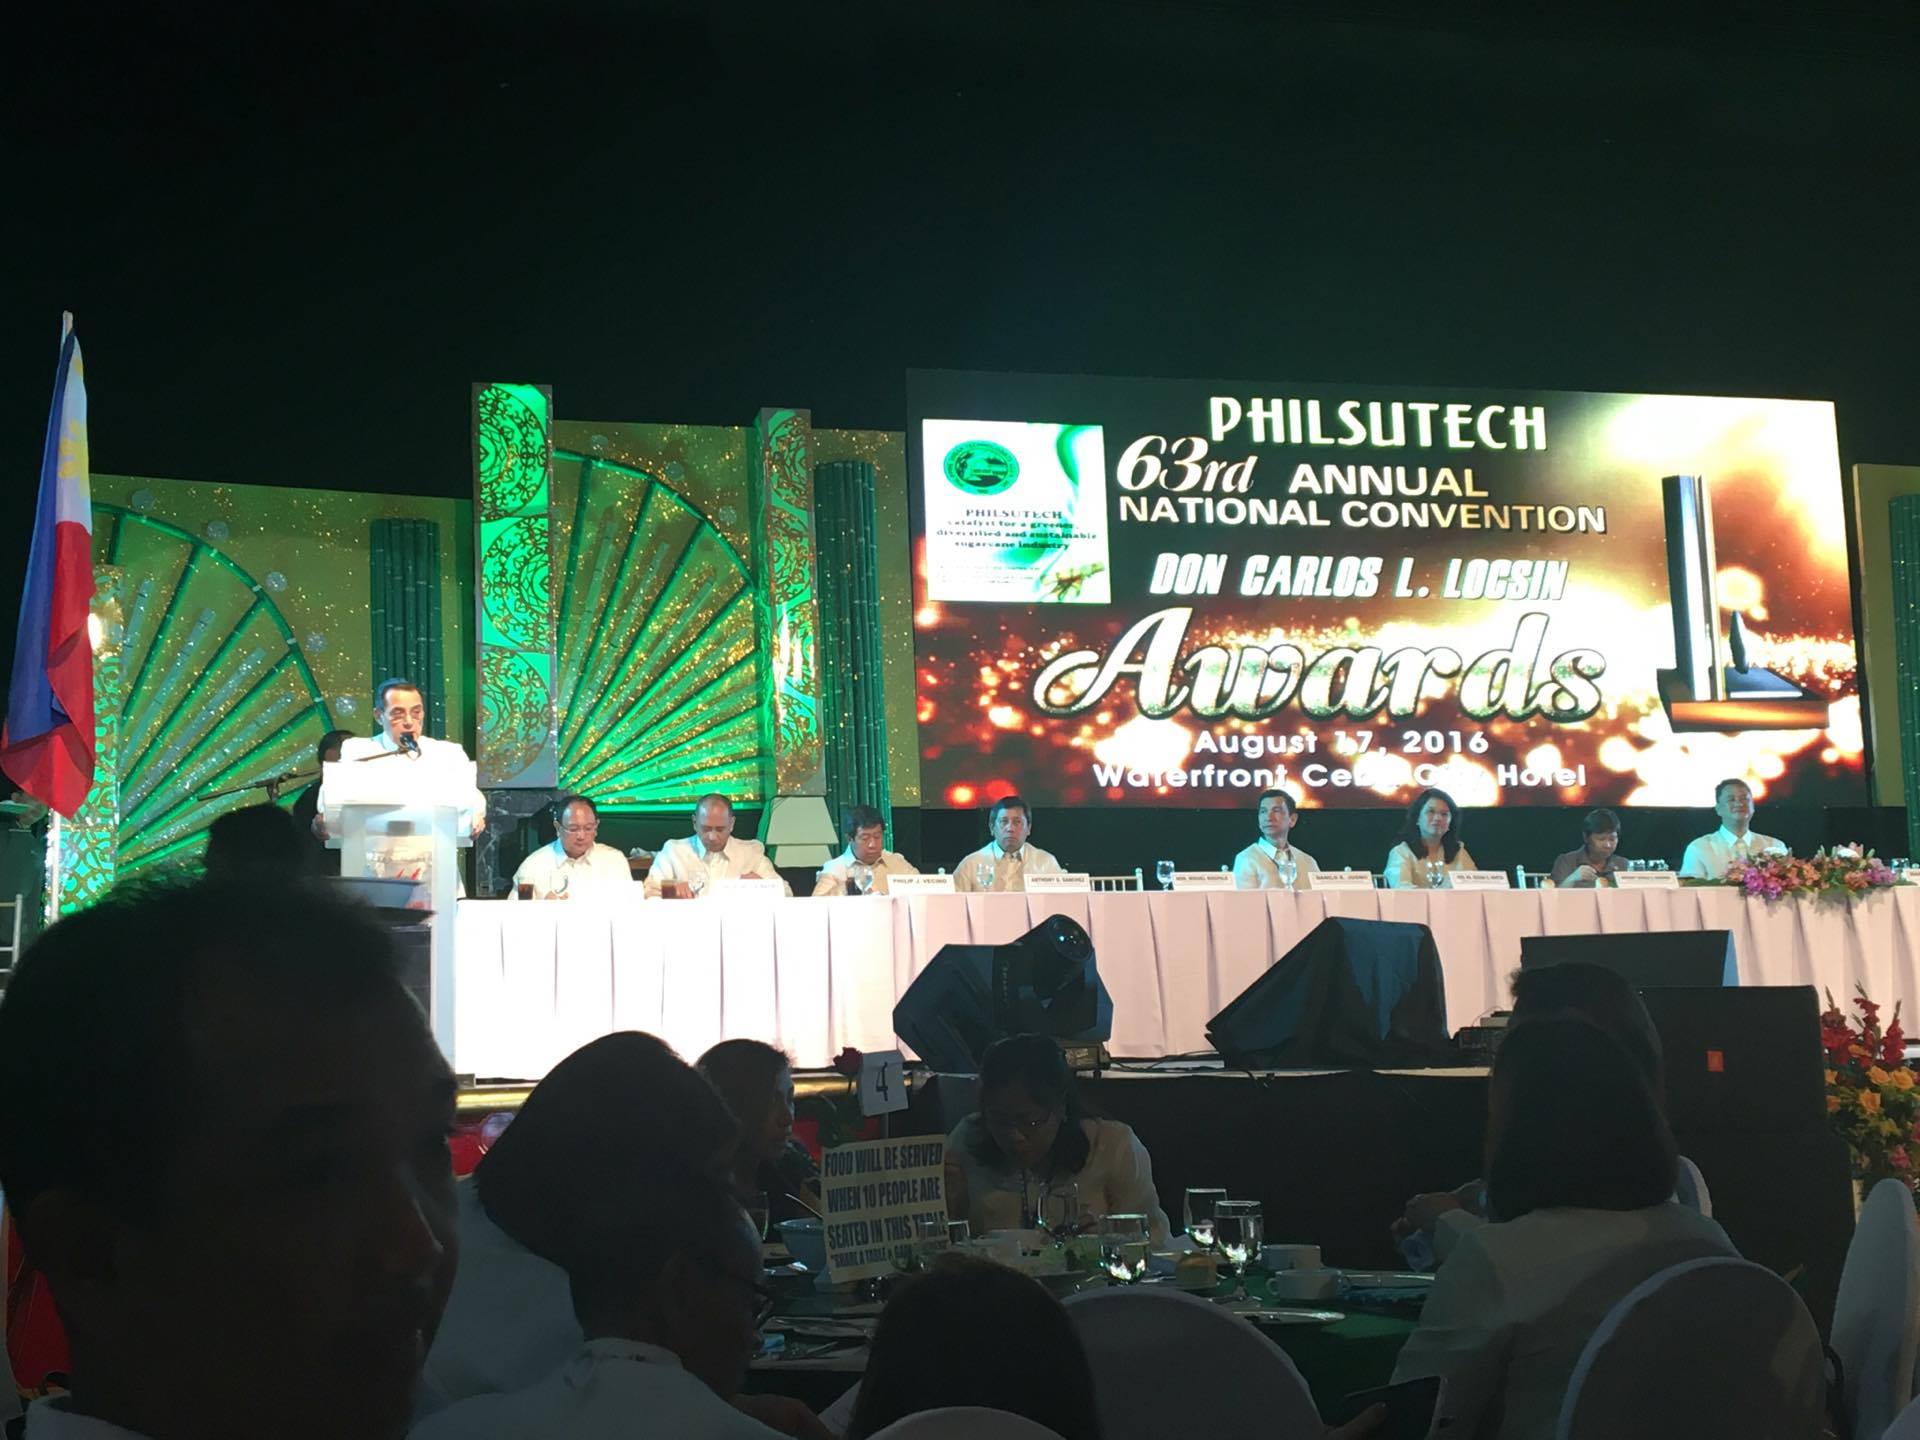  63rd PHILSUTECH Annual National Convention - Philippines